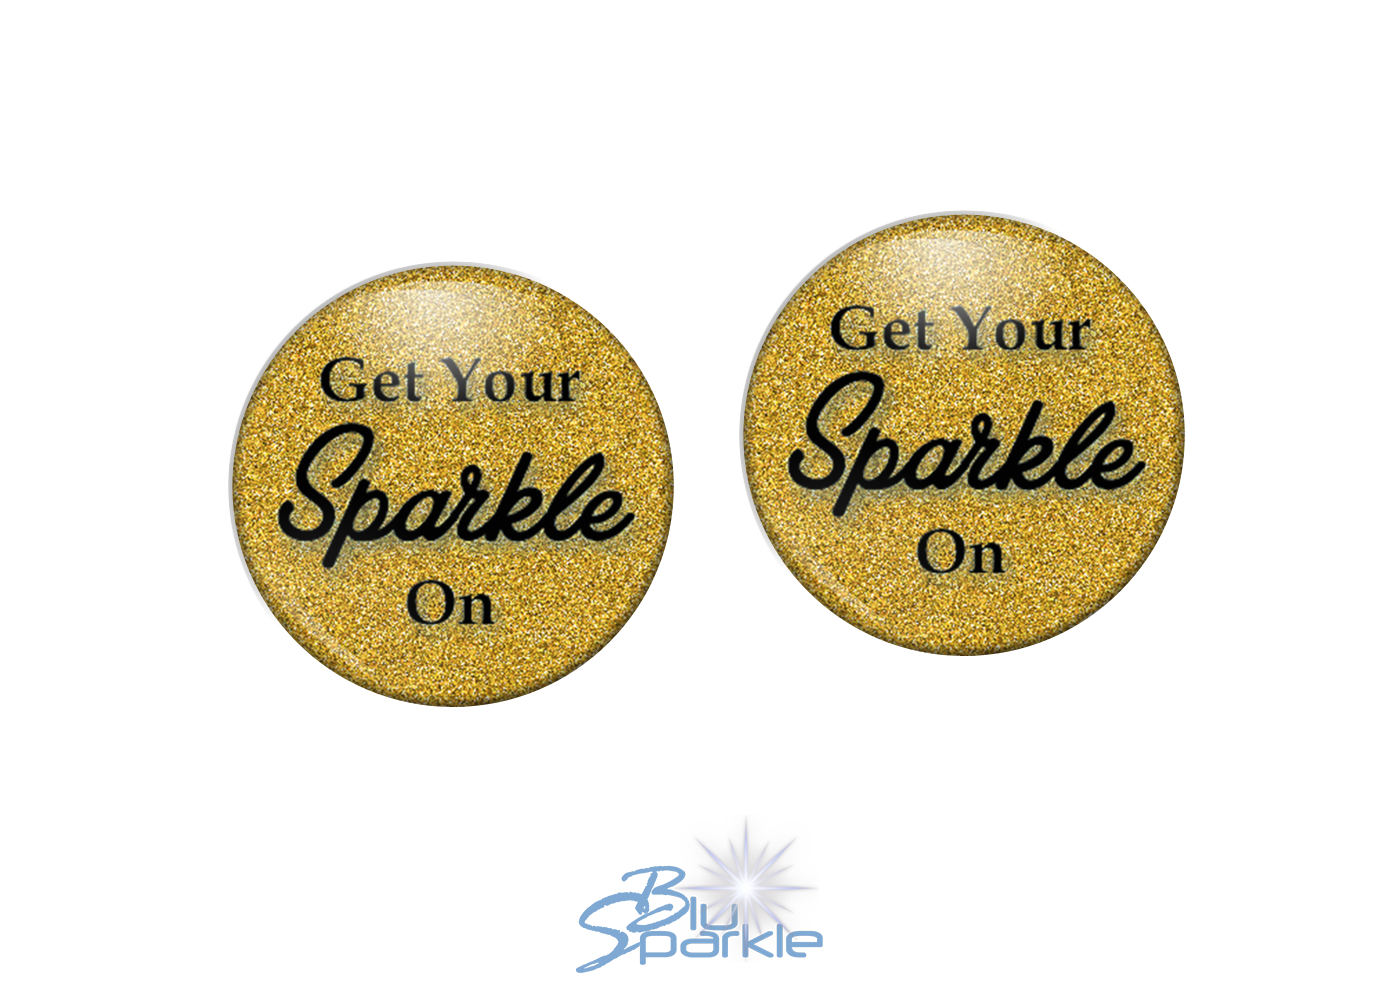 Get Your Sparkle On - Earrings